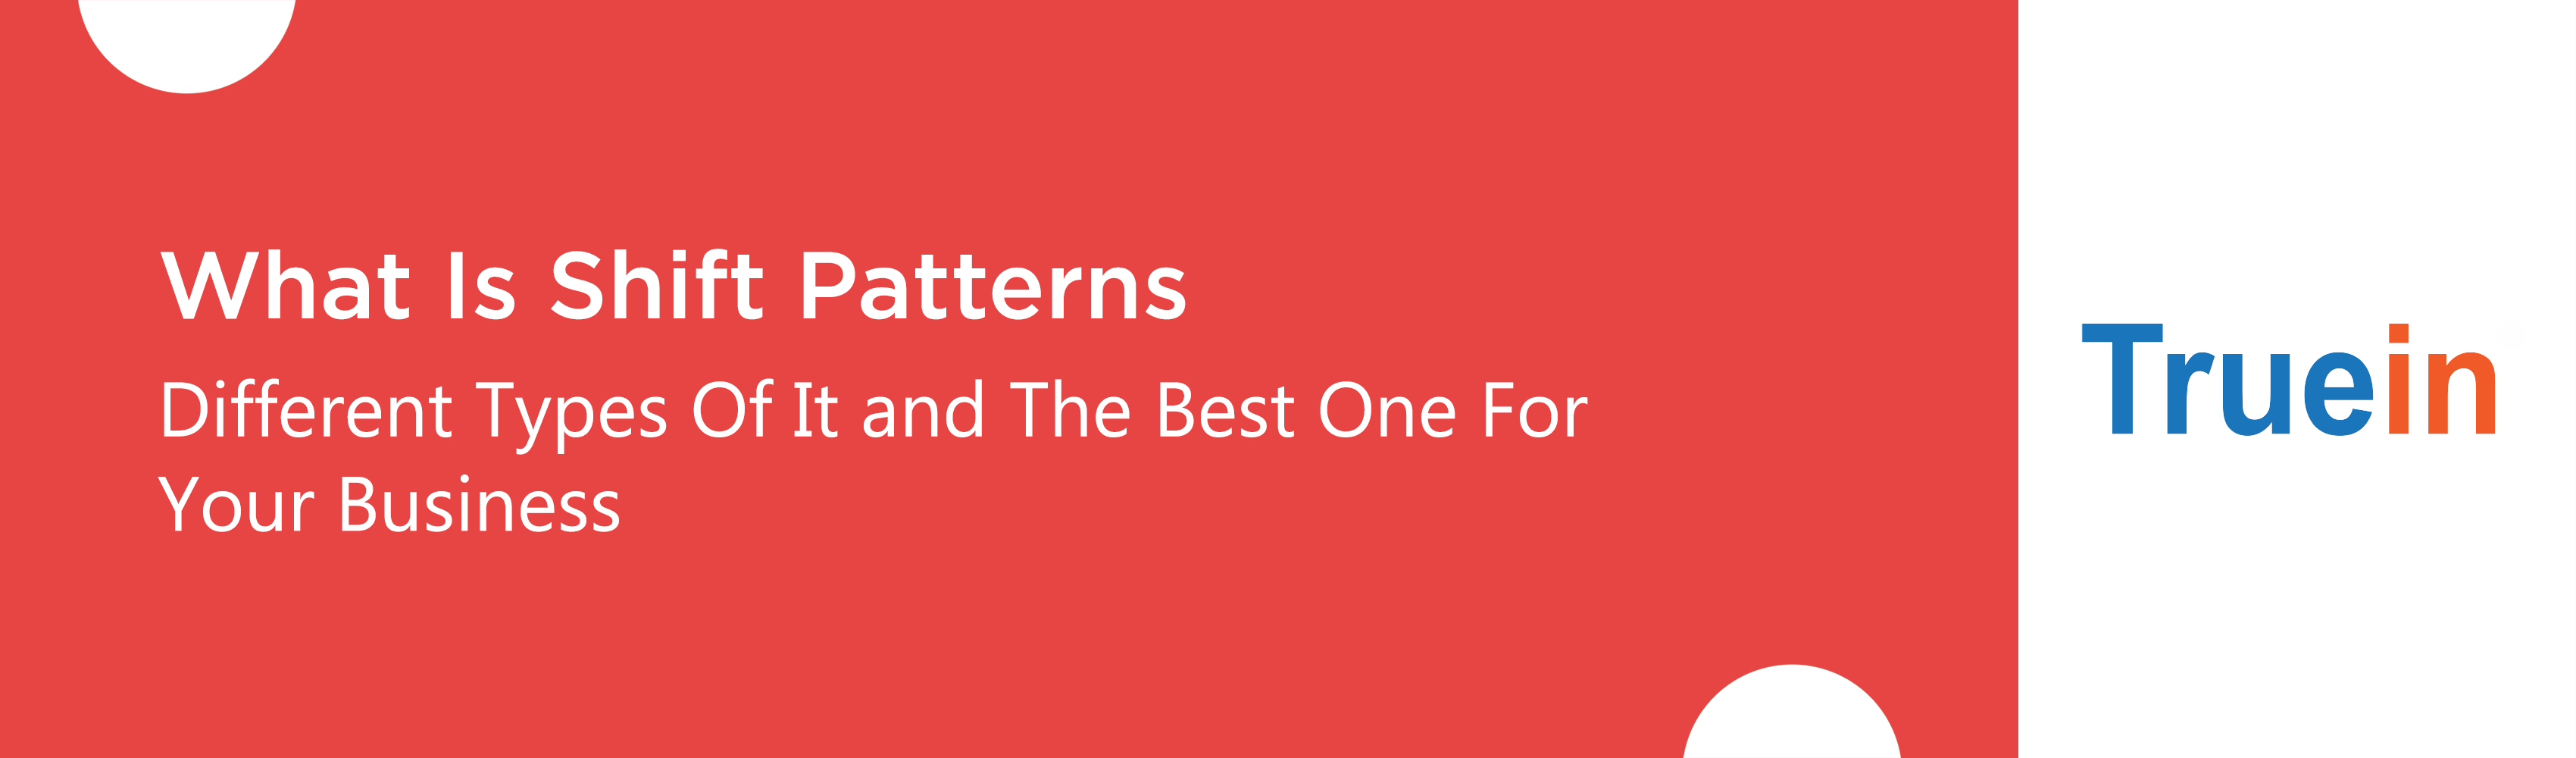 What Is Shift Patterns, Different Types Of It and The Best One For Your Business